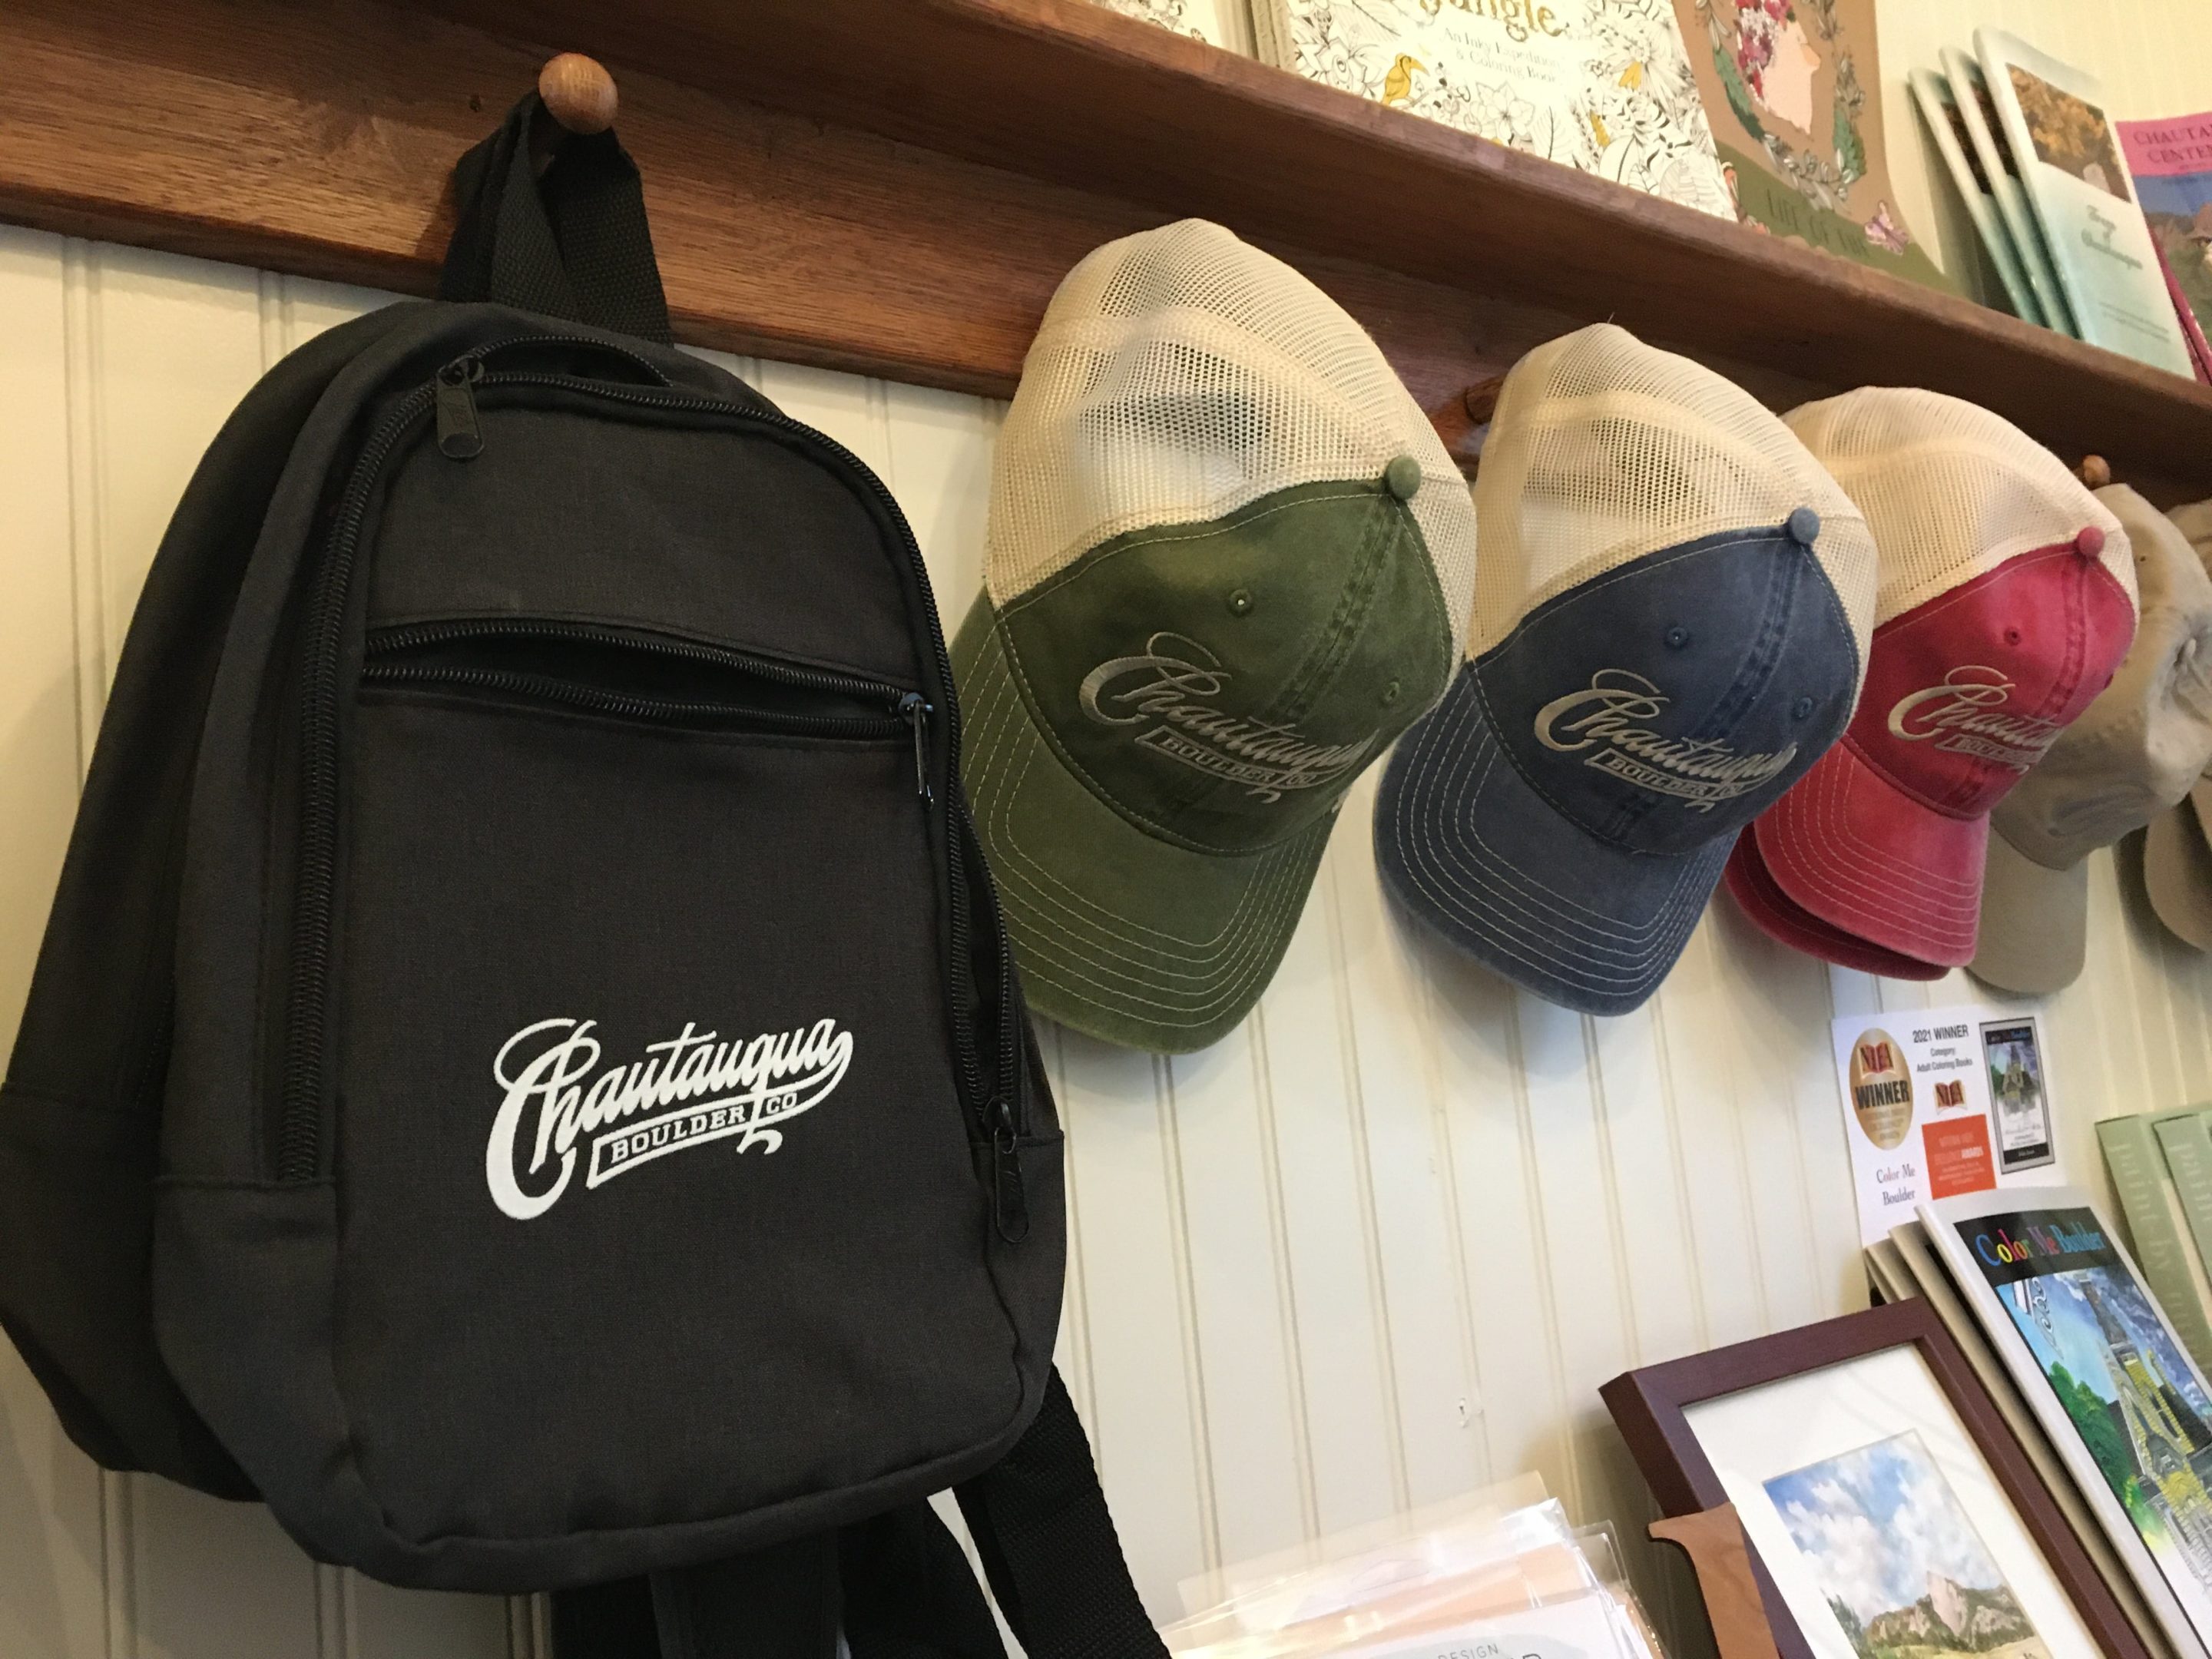 Chautauqua backpack and baseball caps in the general store